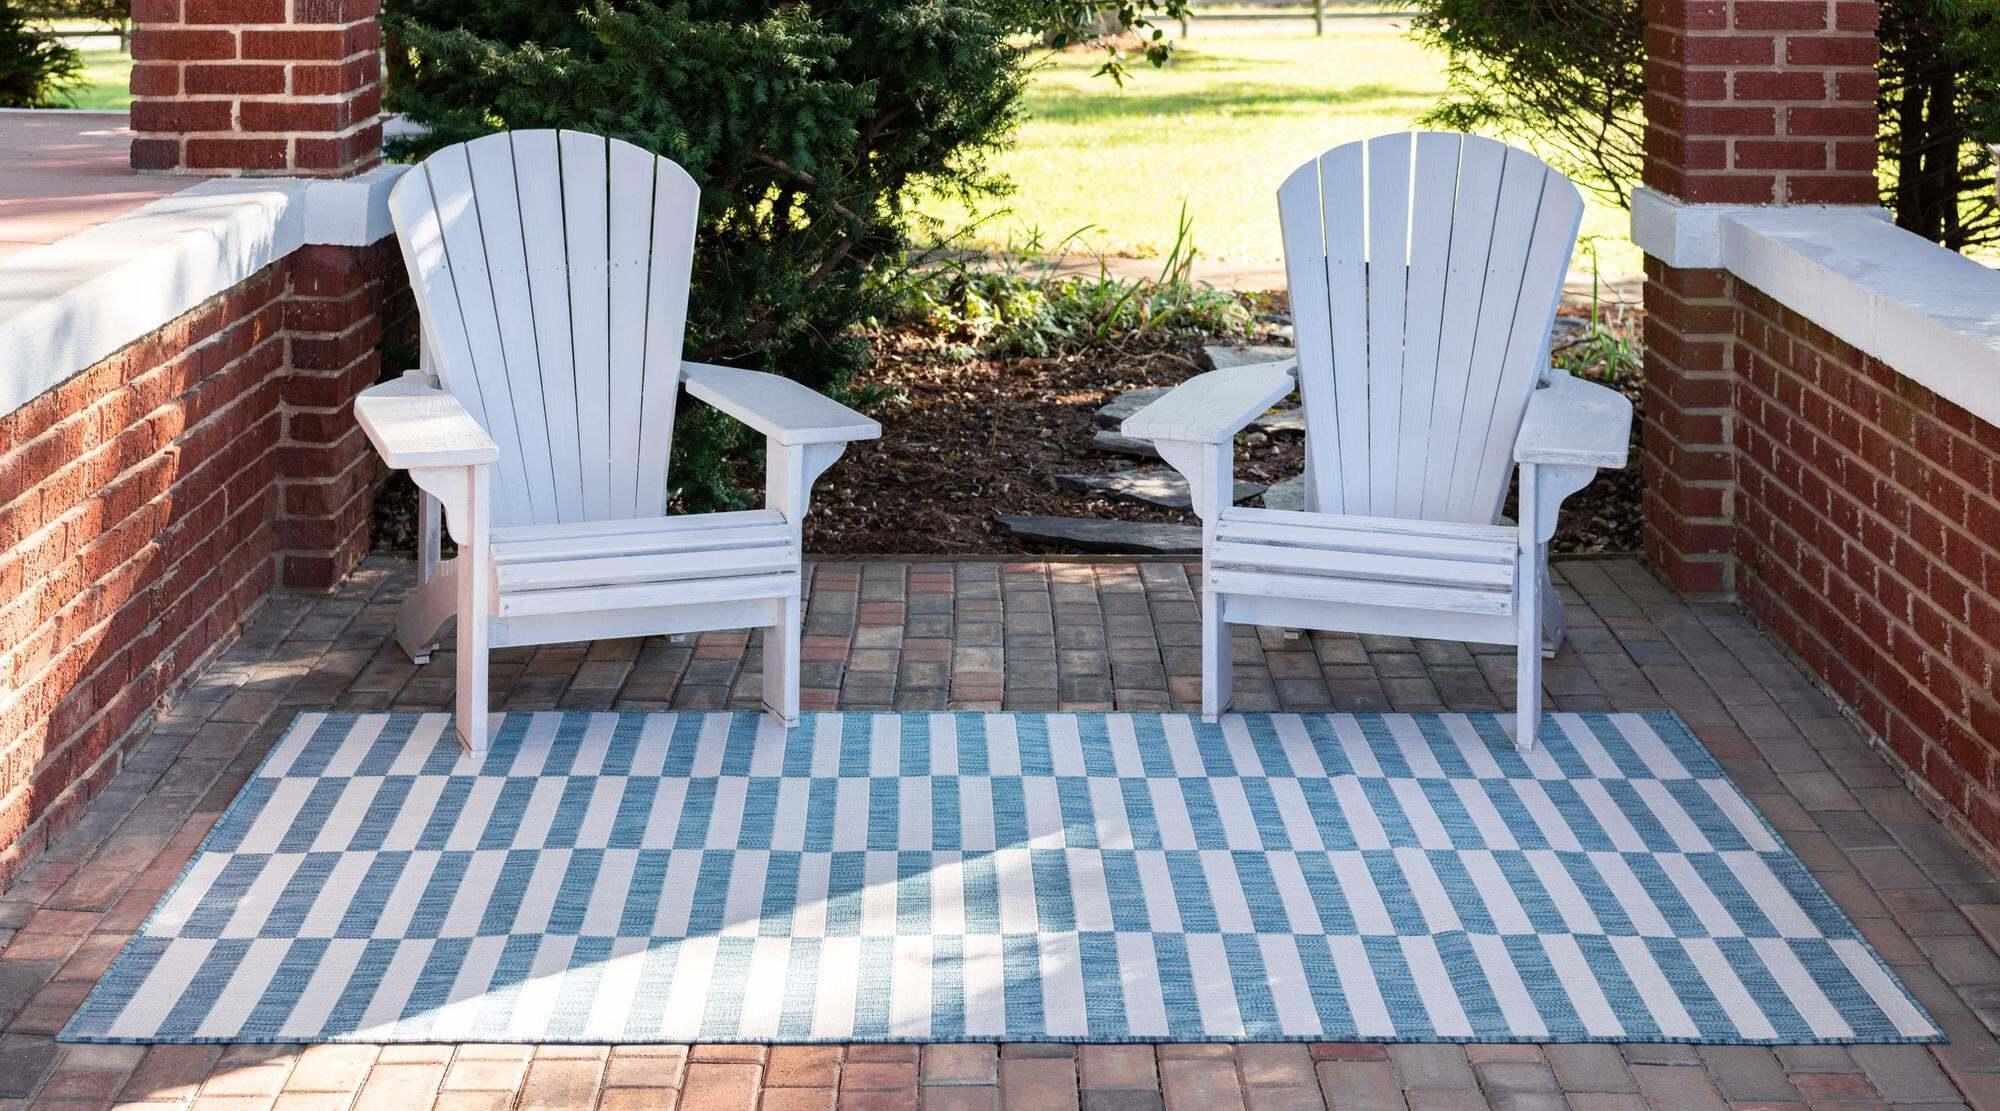 Unique Loom Outdoor Rugs - Outdoor Striped Geometric Rectangular 8x11 Rug Blue & Ivory